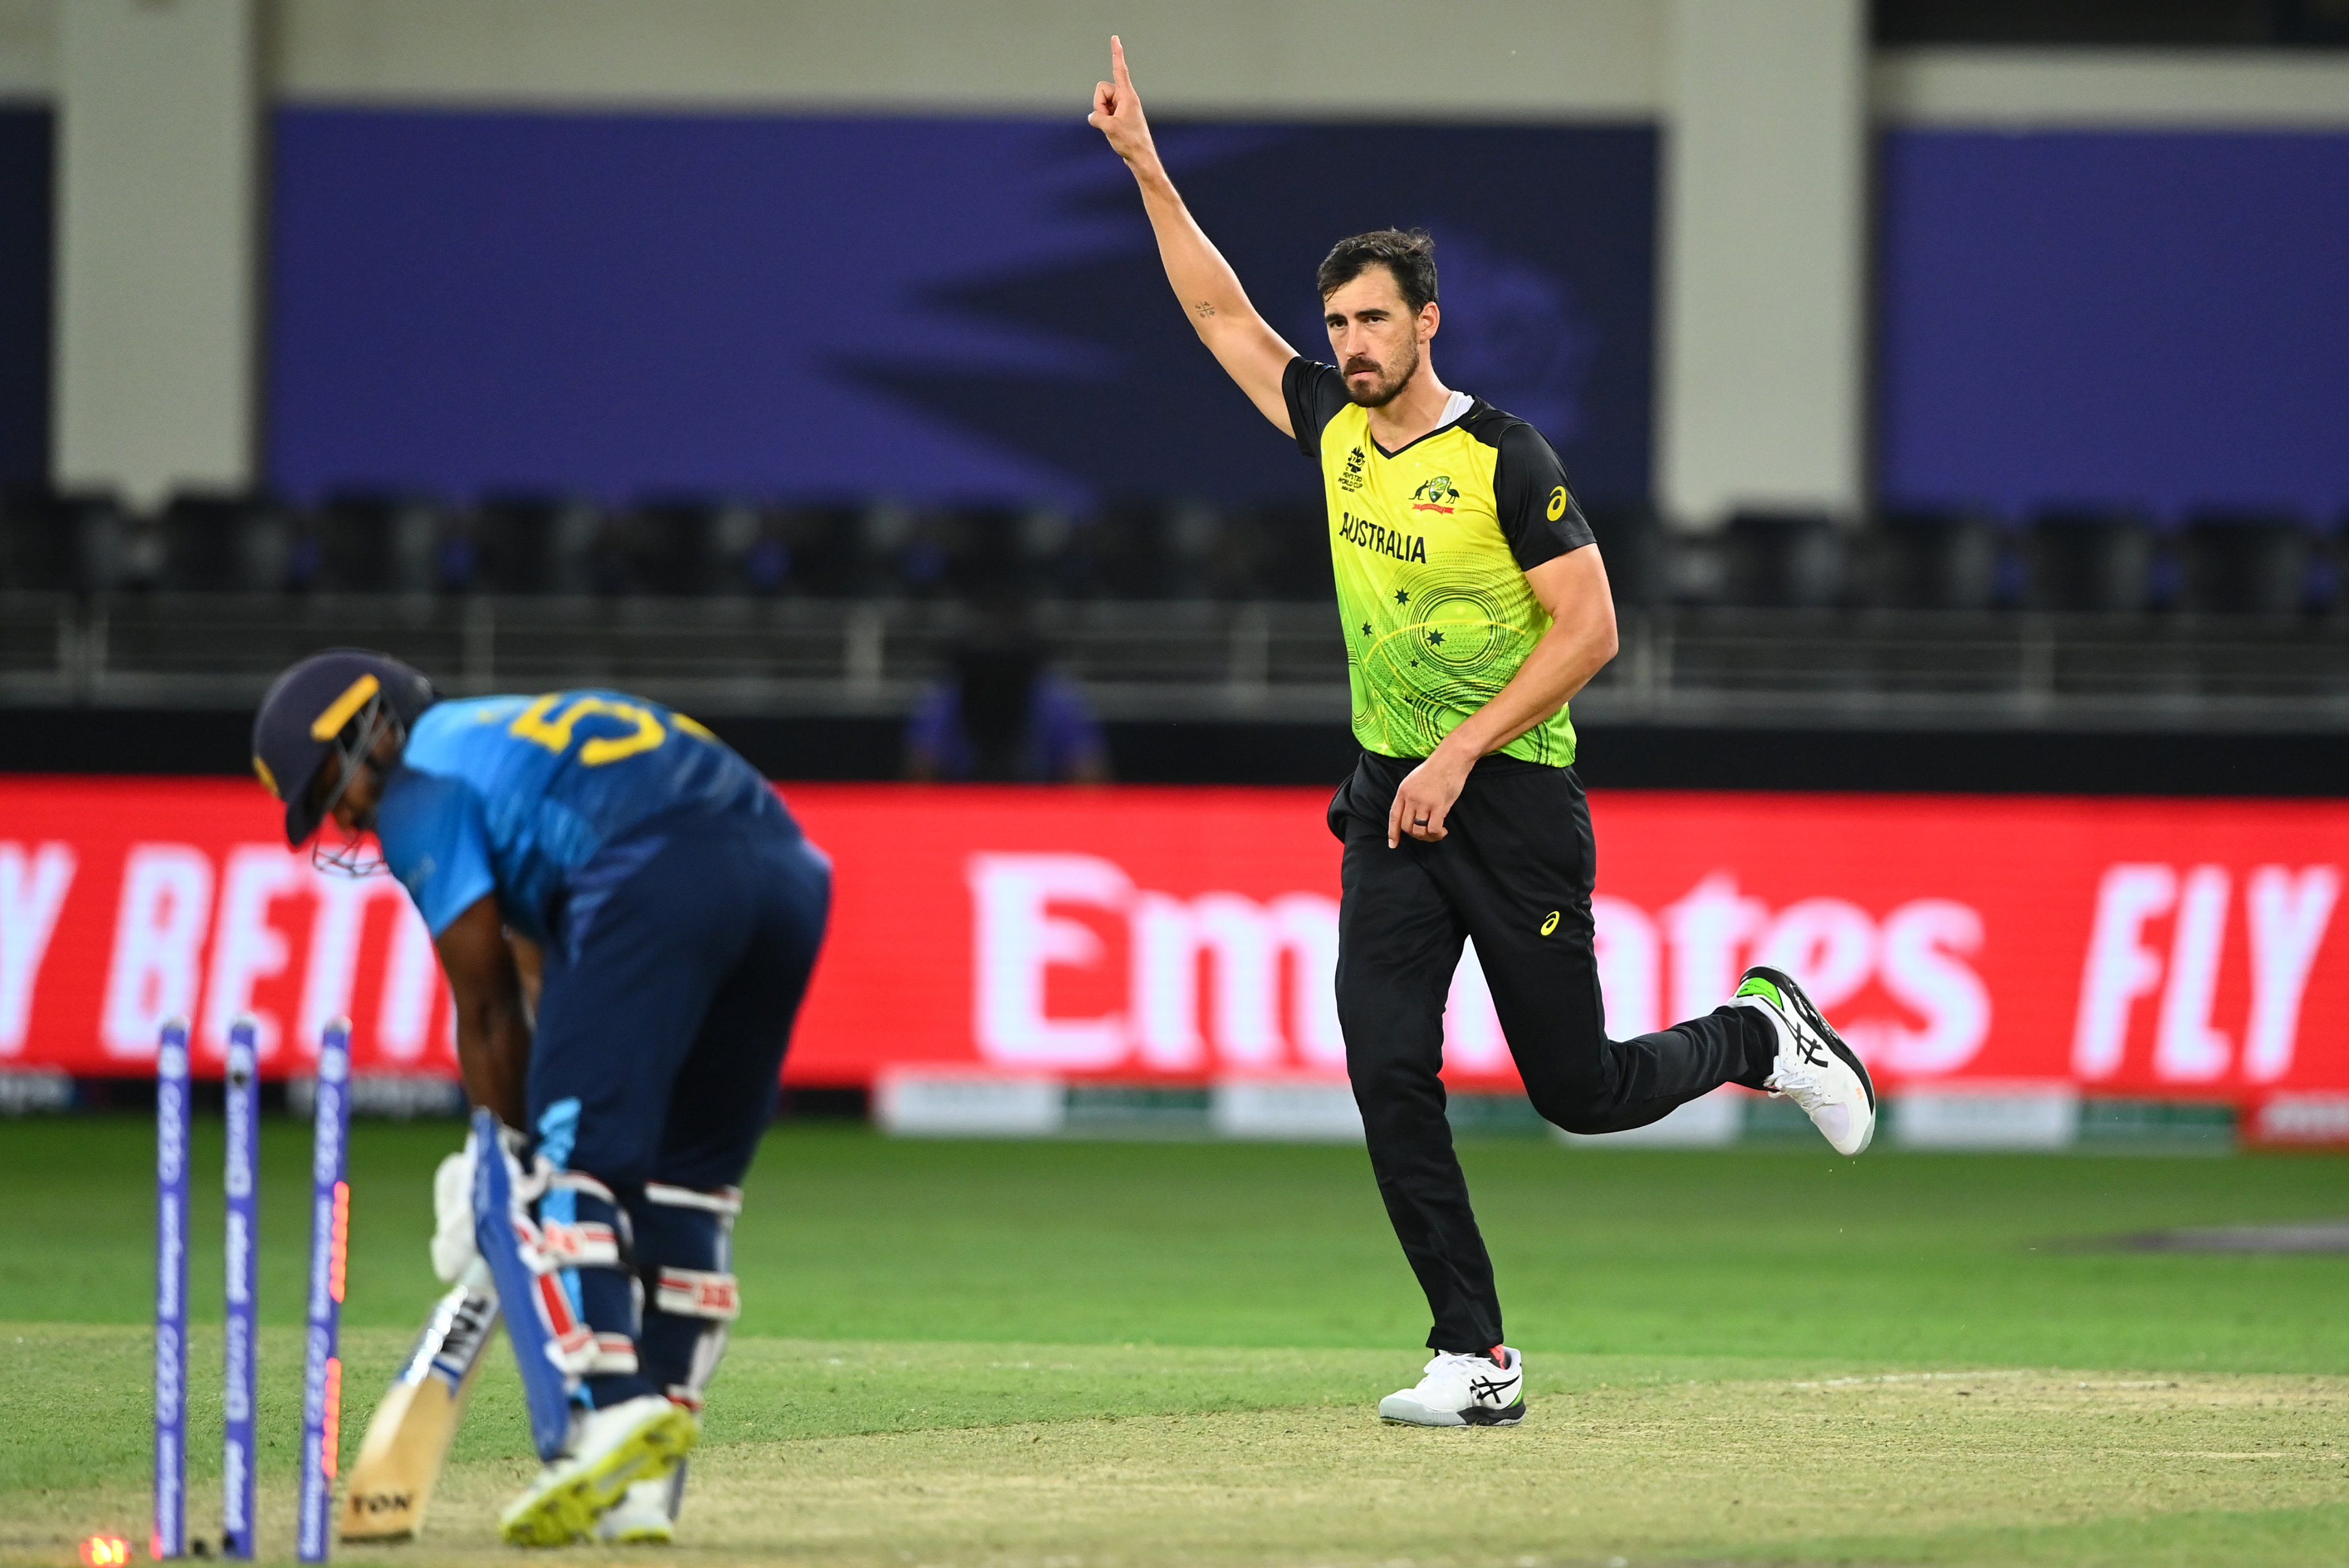 T20 World Cup 2021 | SIX and OUT! Twitter reacts as Mitchell Starc castles Kusal Perera with a yorker after six downtown